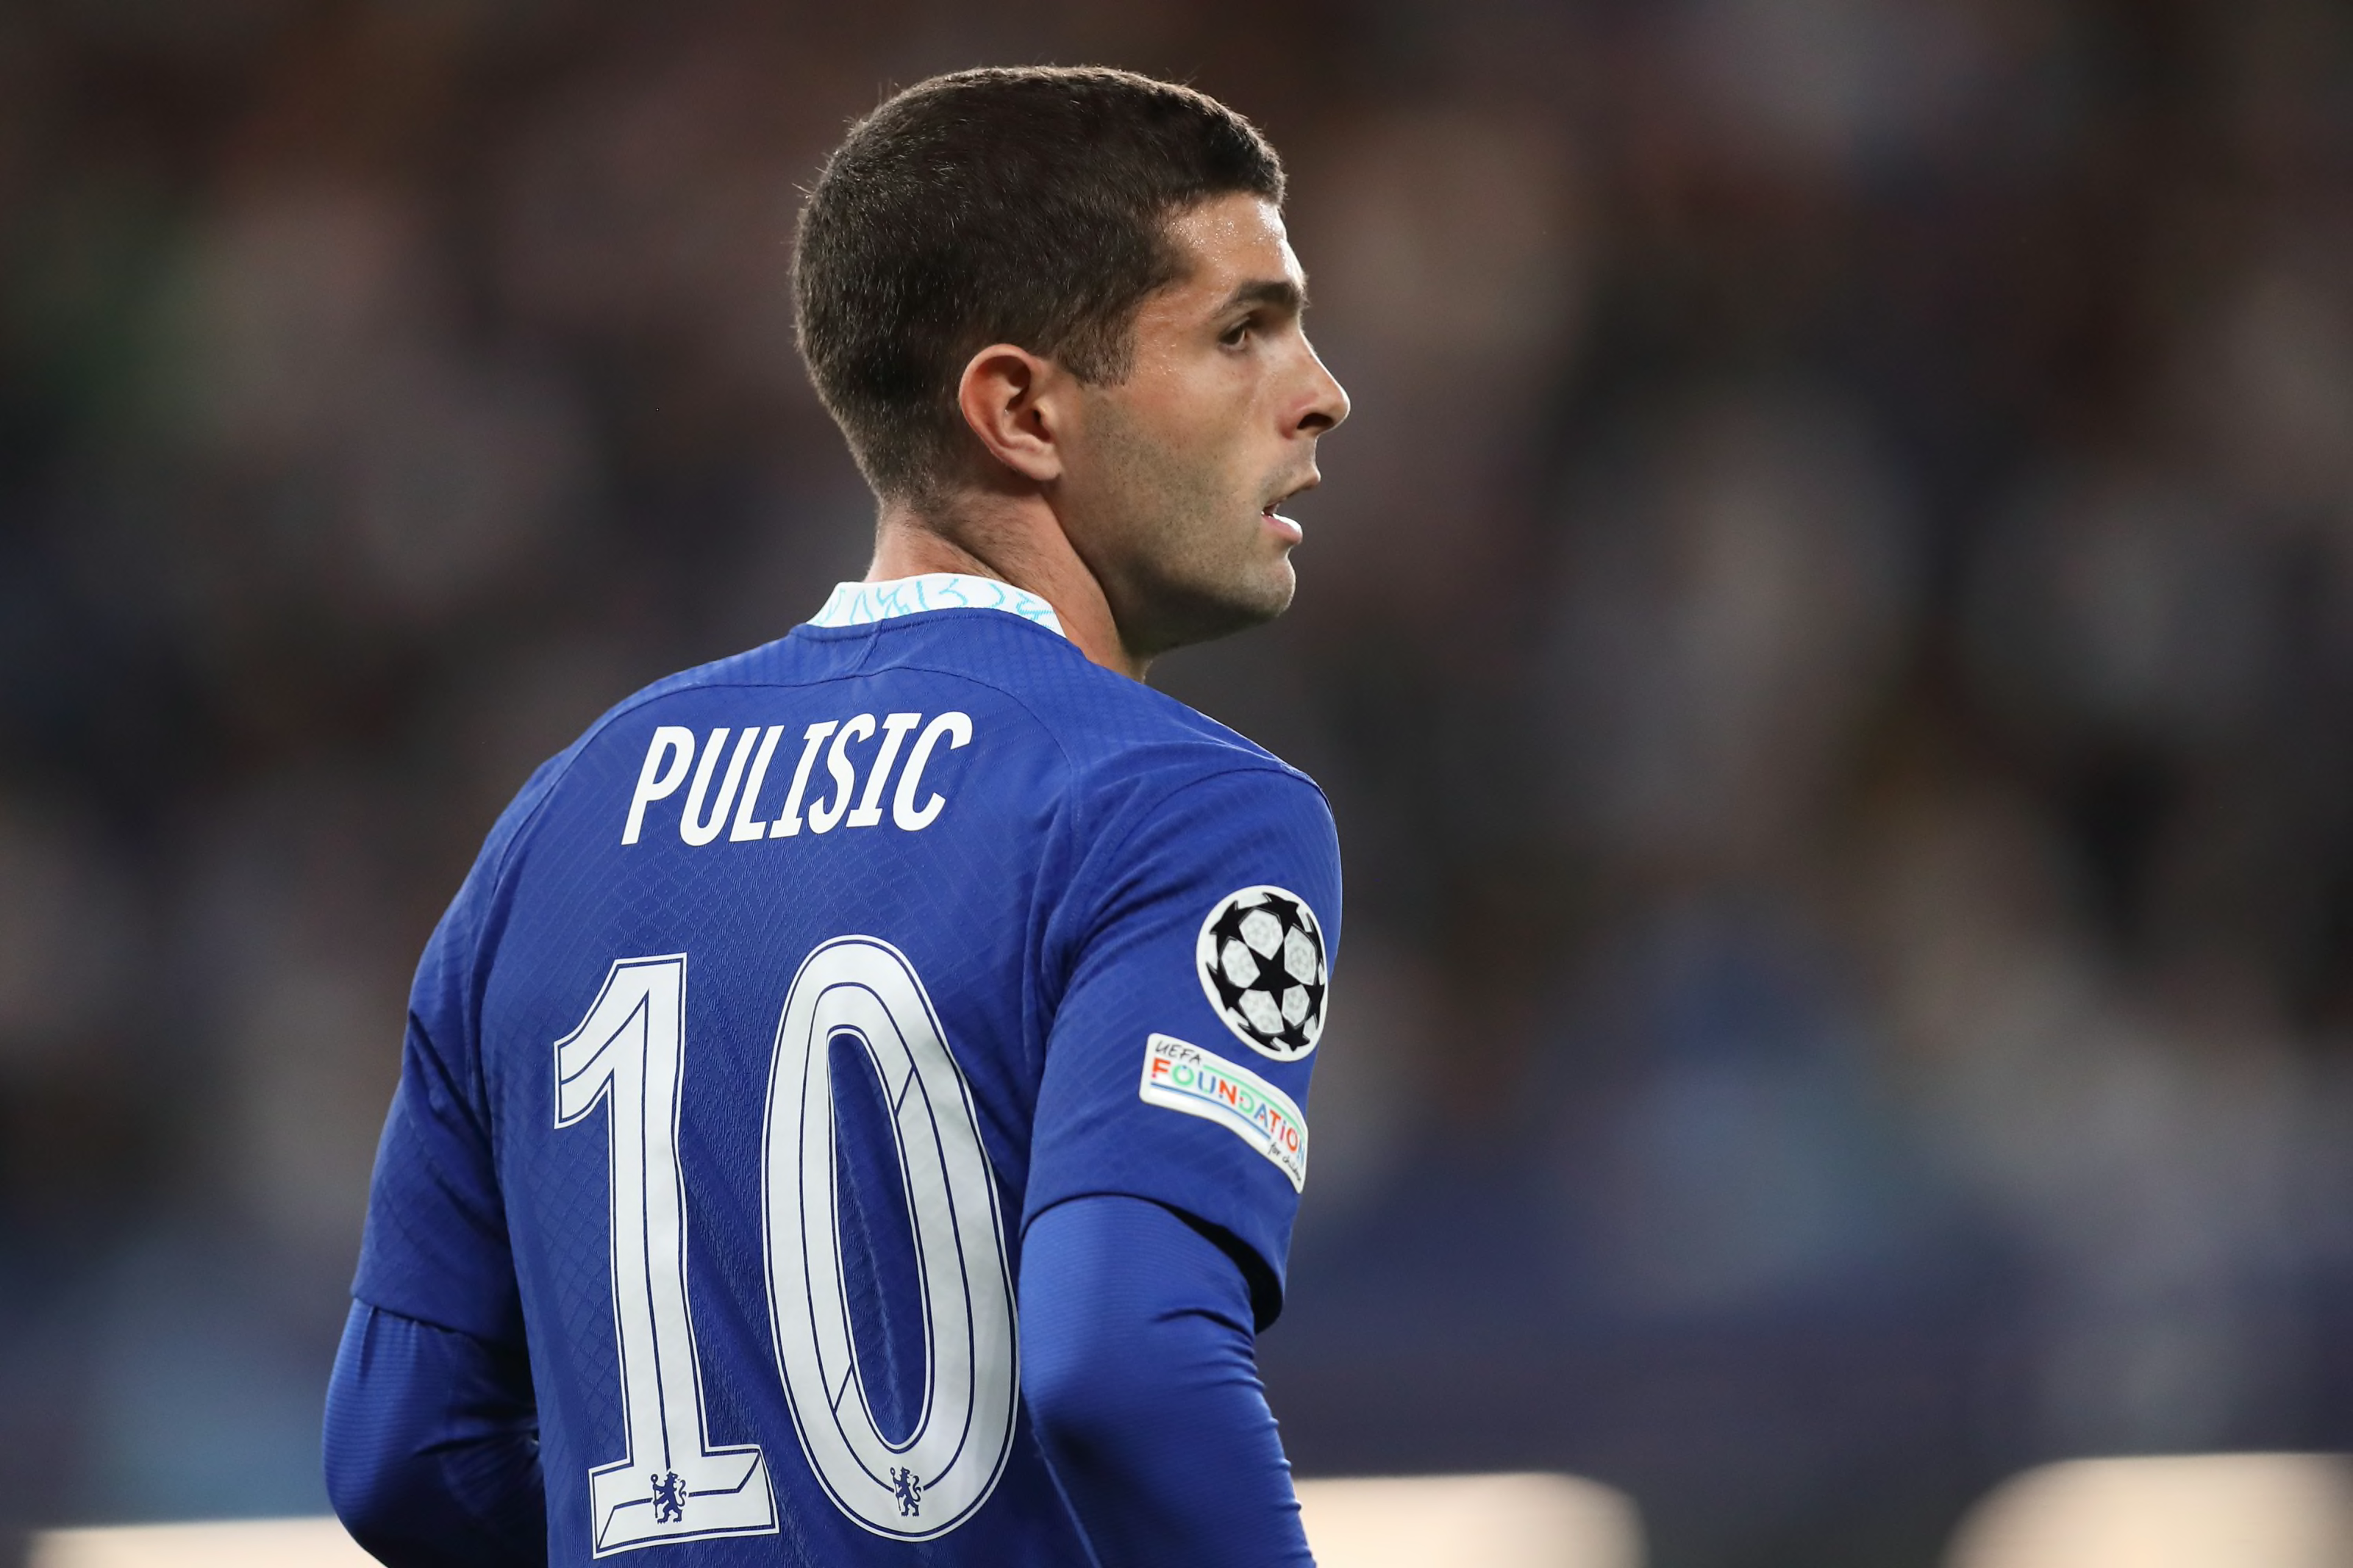 Chelsea reportedly open to selling Christian Pulisic for low fee